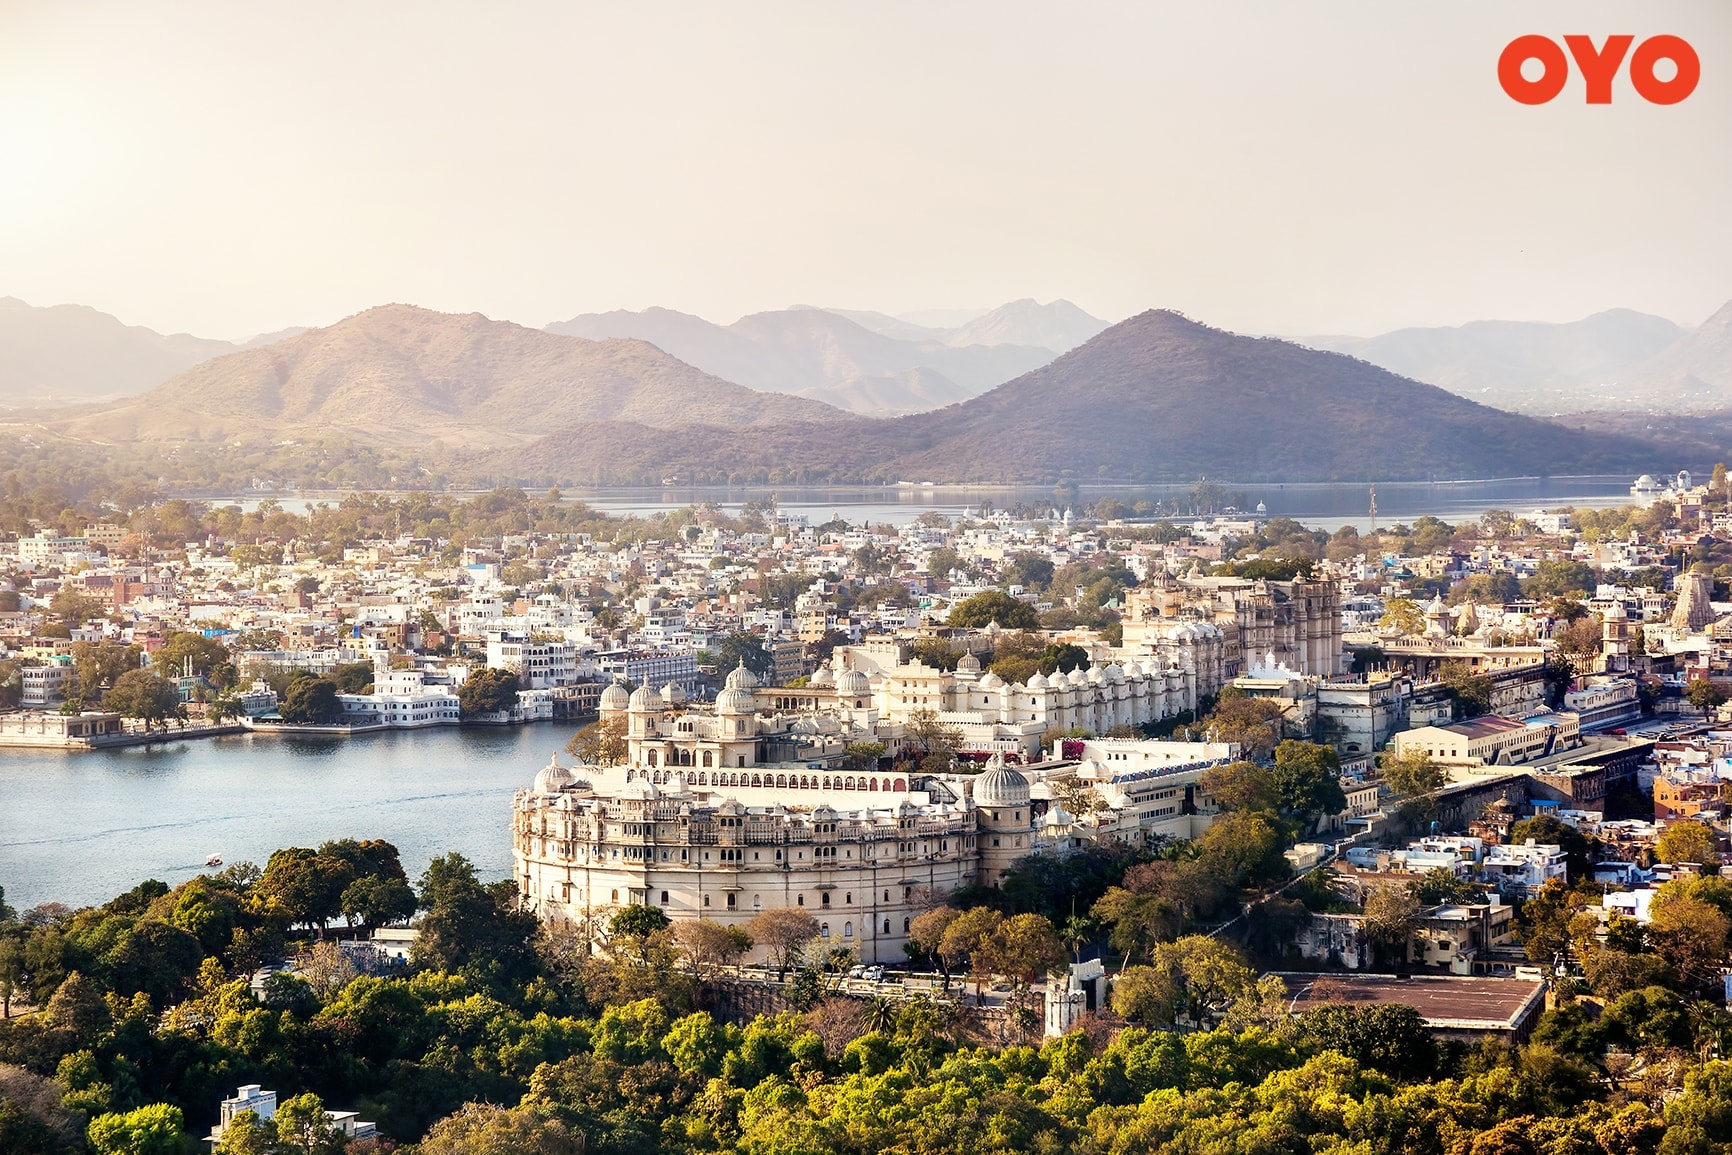 Udaipur Travel Guide